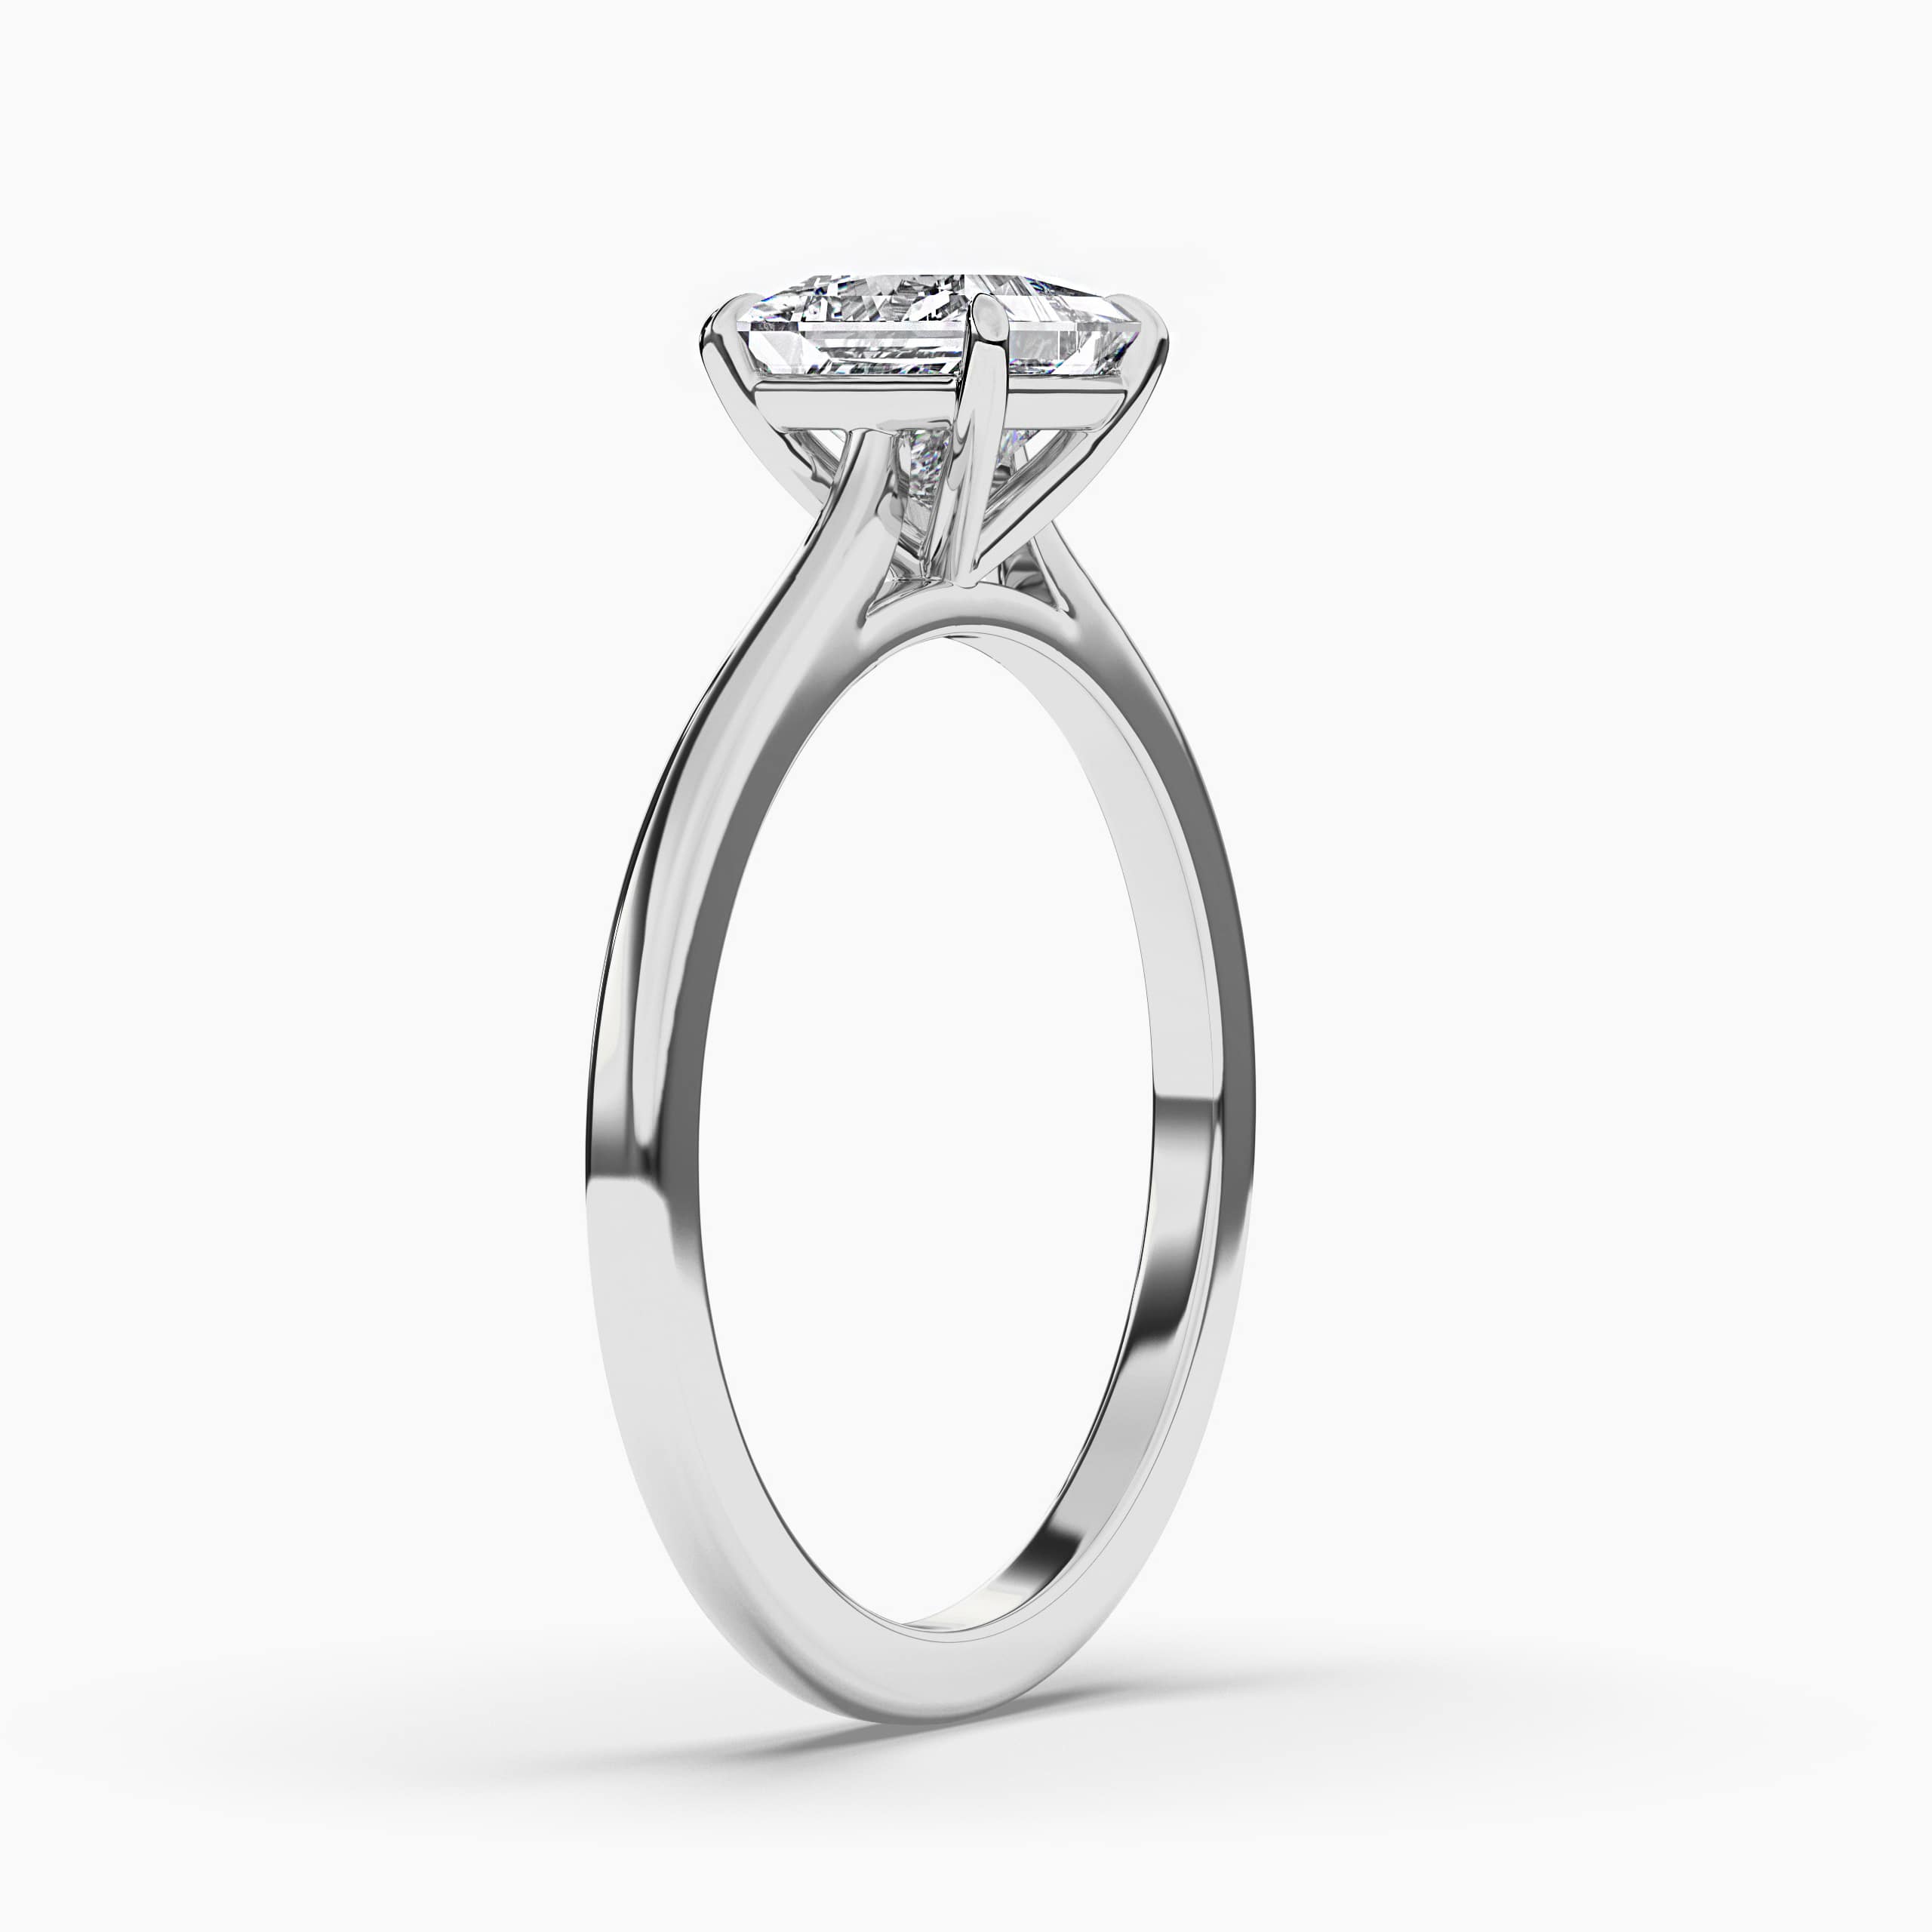 Princess Cut Solitaire Diamond White Gold Engagement Ring